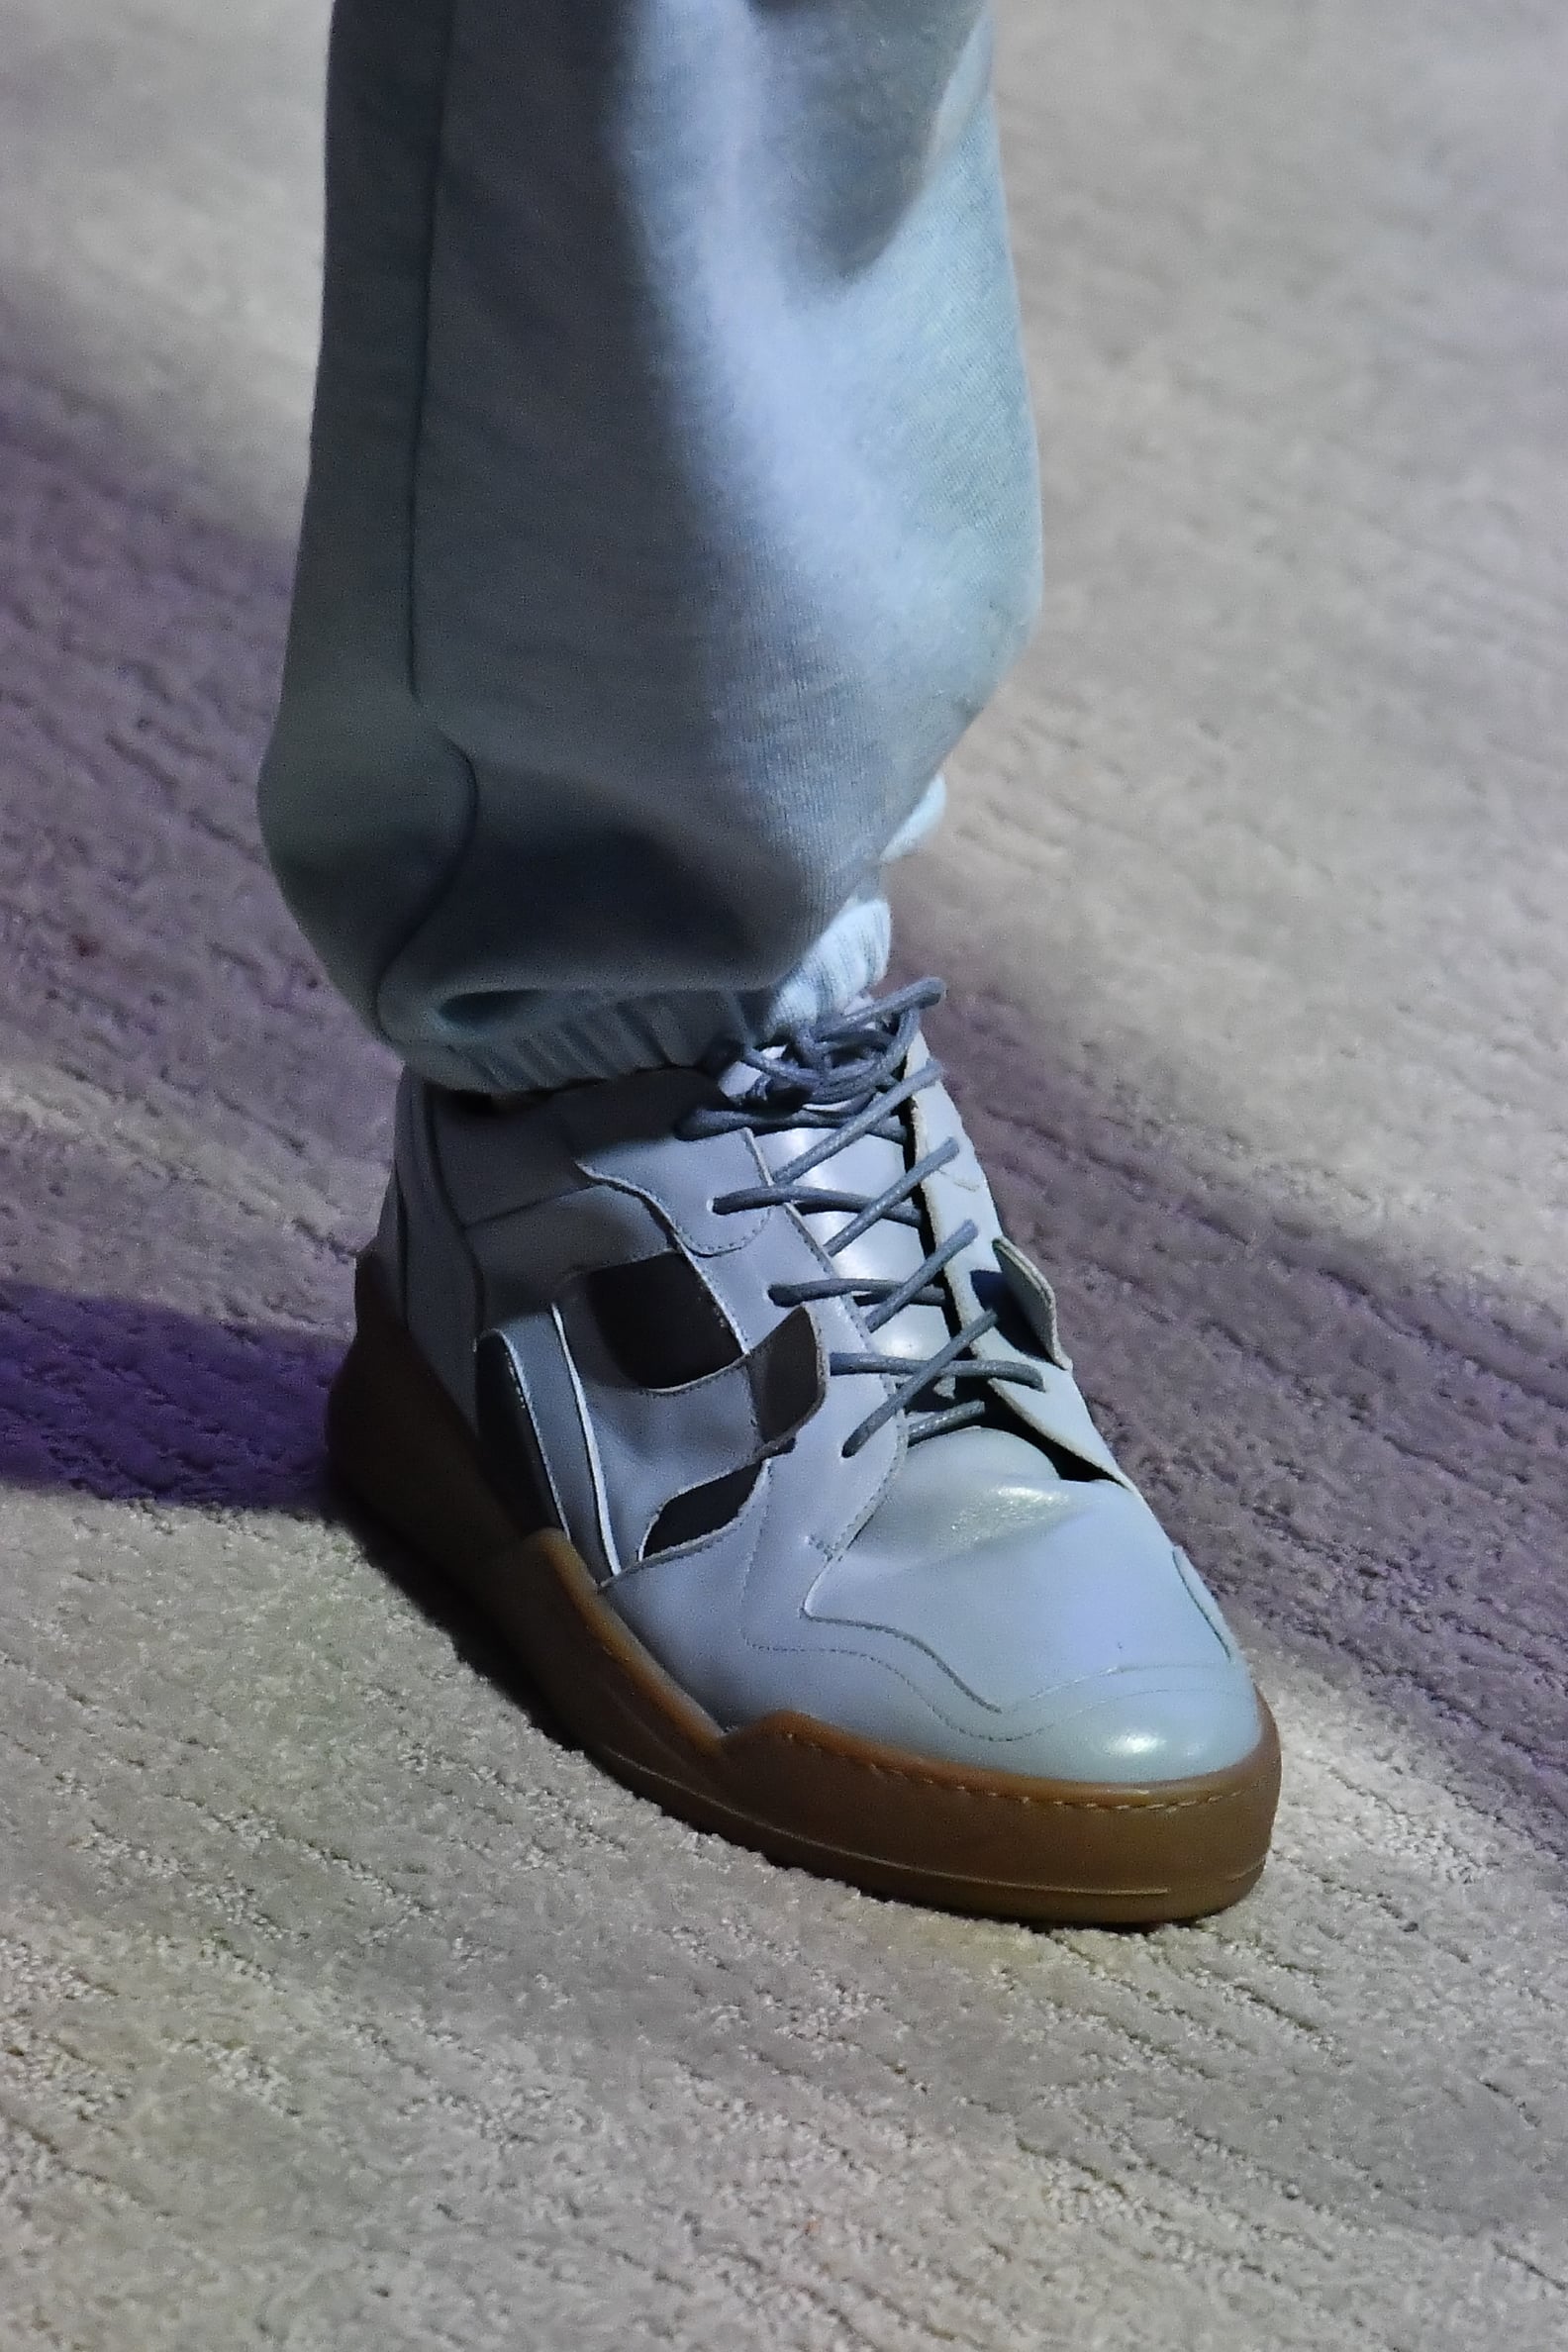 The Best Shoes From Fashion Week Fall 2020 | POPSUGAR Fashion